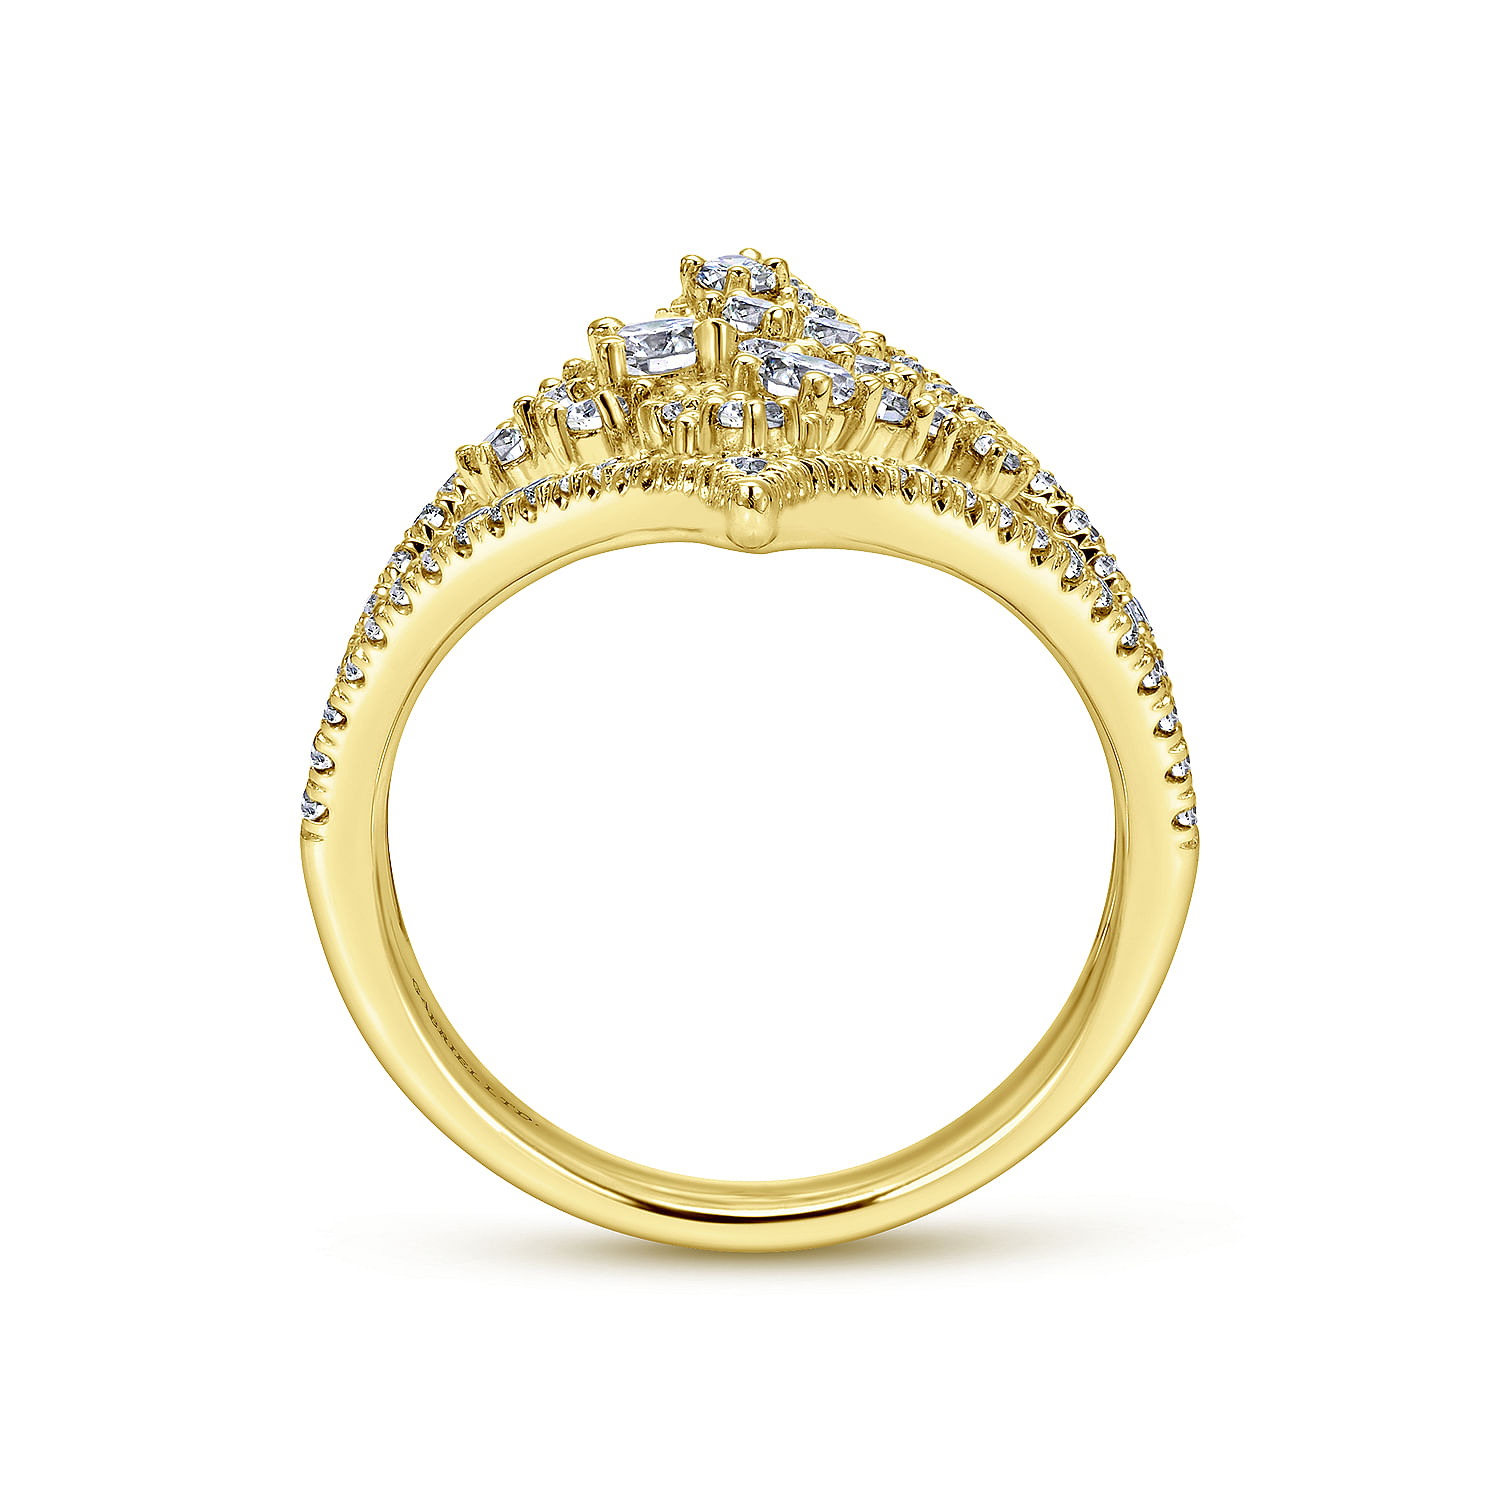 18K Yellow Gold Pointed Ends Ring with Diamond Cluster Center